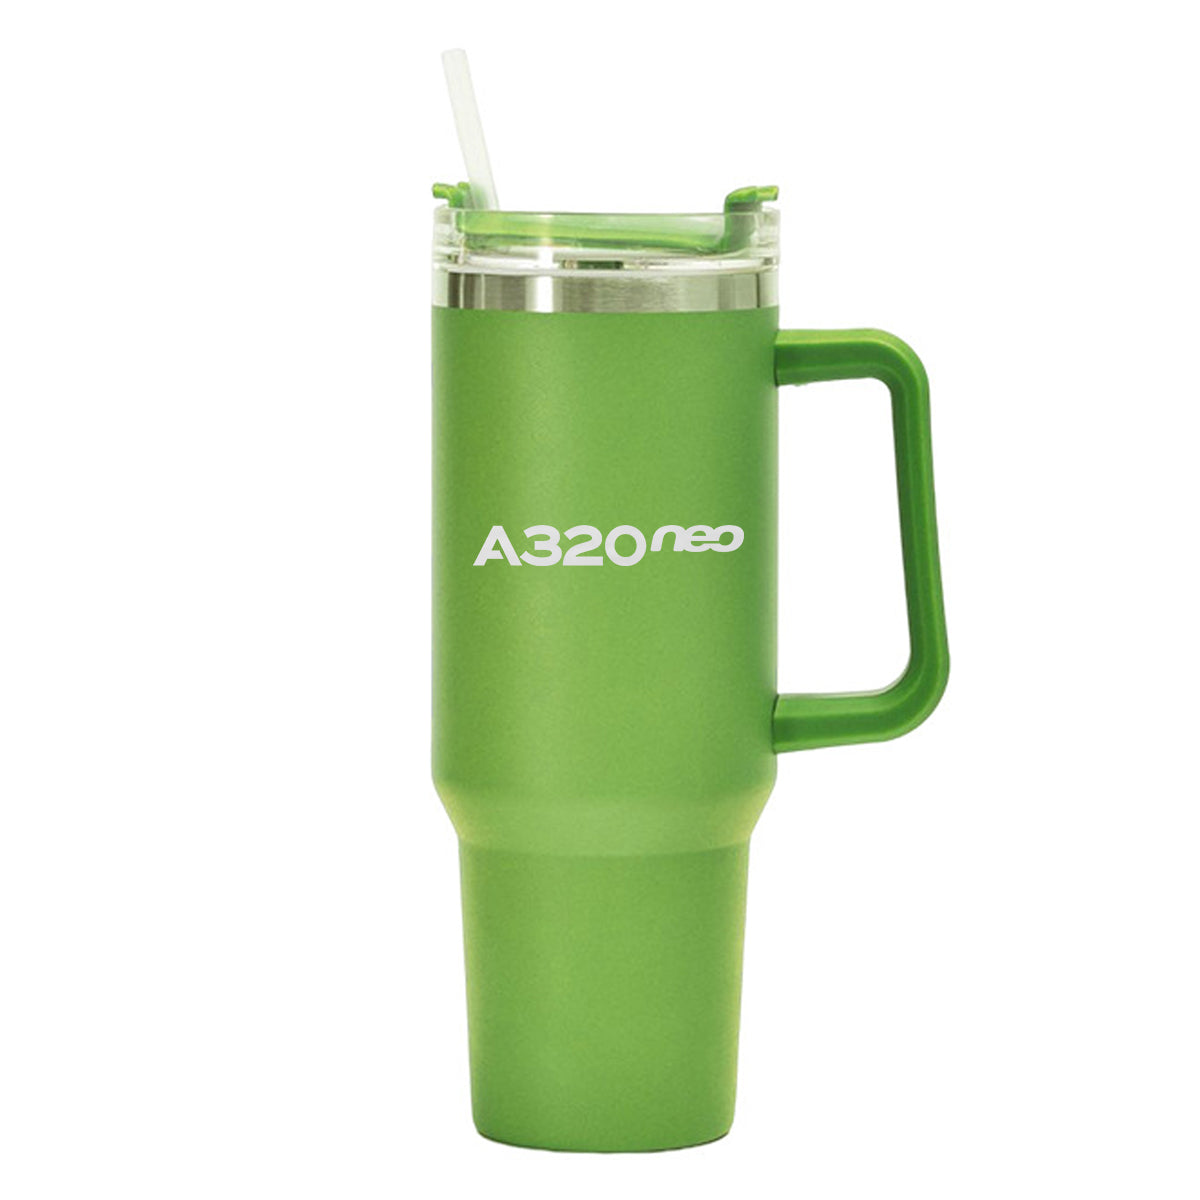 A320neo & Text Designed 40oz Stainless Steel Car Mug With Holder